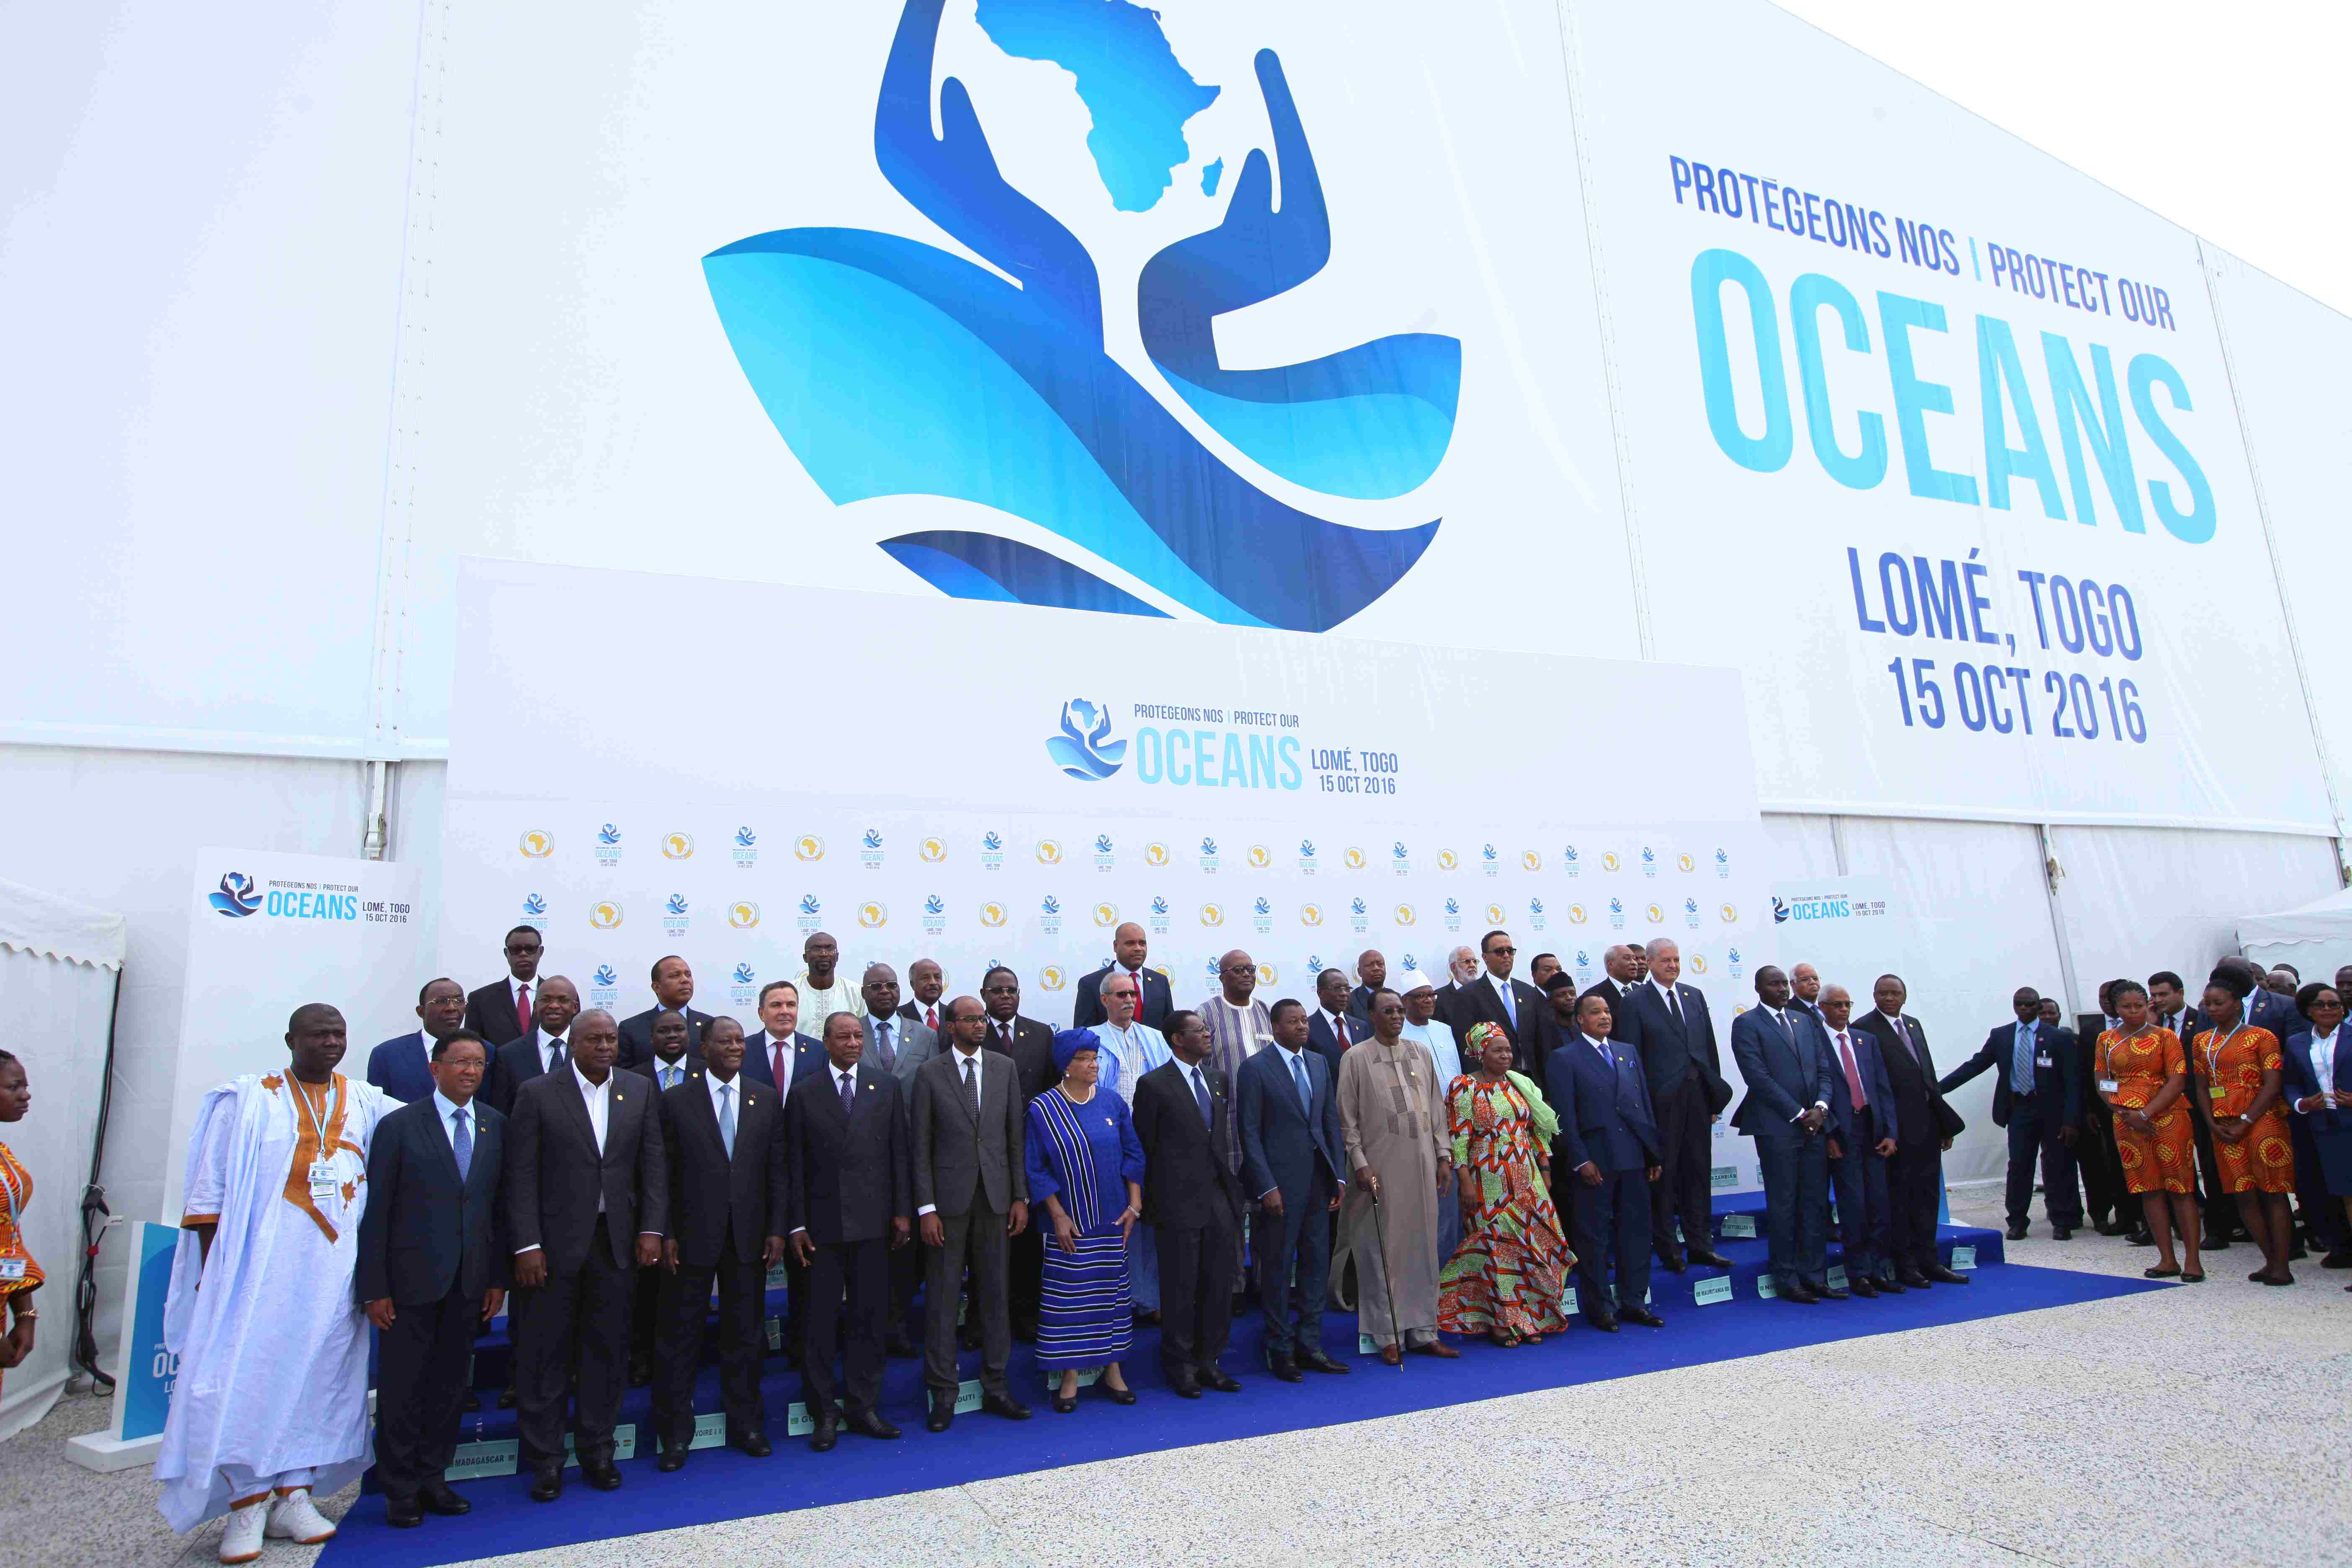 VP Osinbajo Represents President Buhari at the African Union Summit on Maritime Security Lome, Togo On 15/10/2016